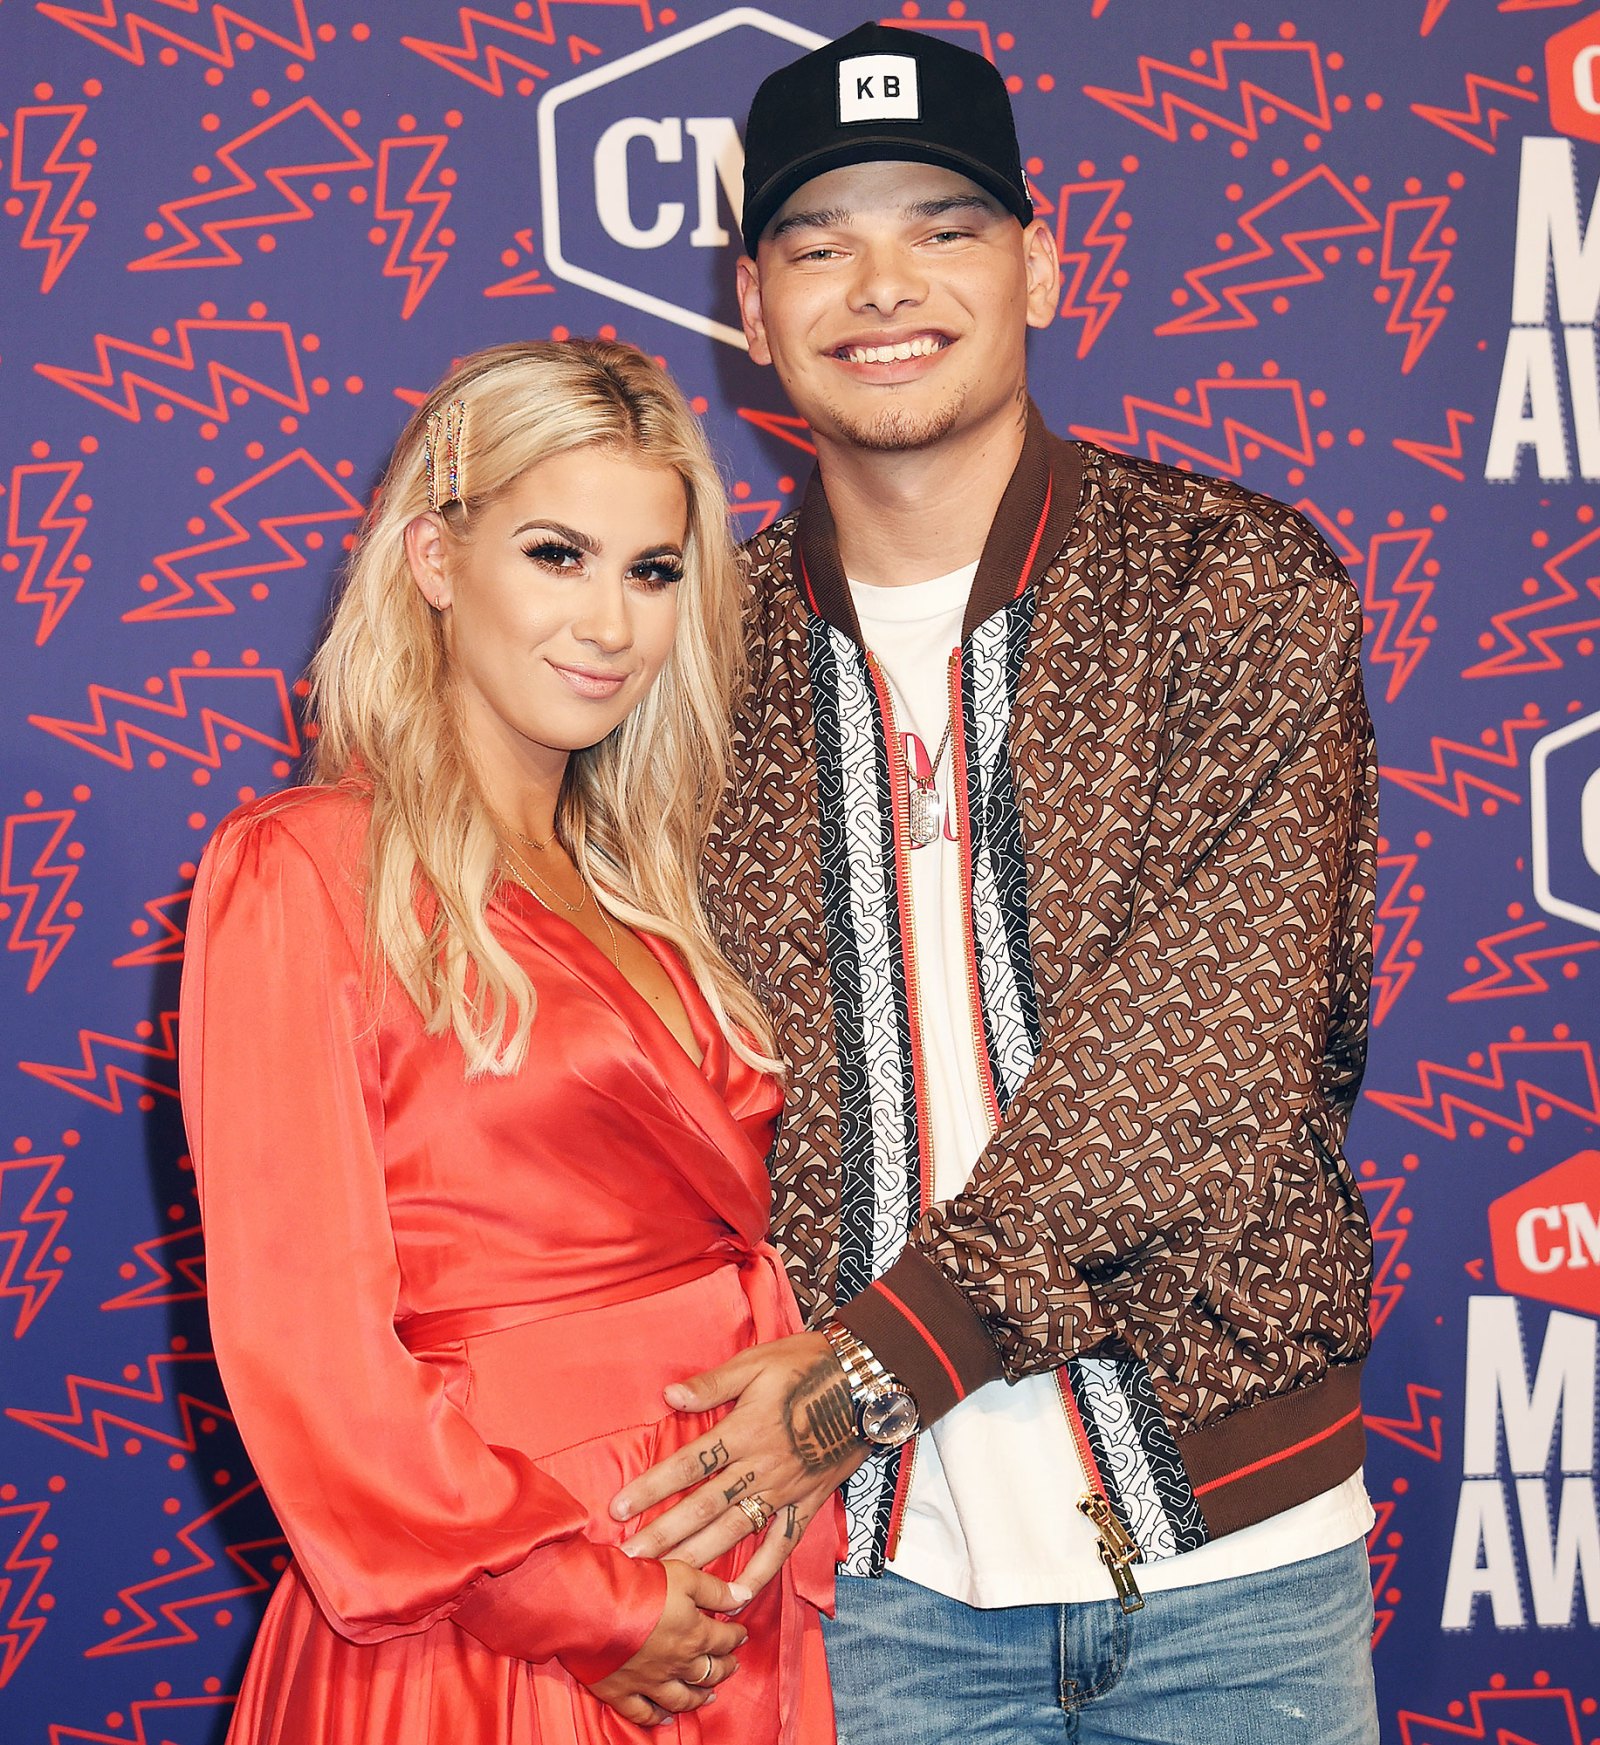 Kane Brown and Pregnant Wife Katelyn Jae at CMT Music Awards Announce Daughter-to-Be’s Name at Baby Shower